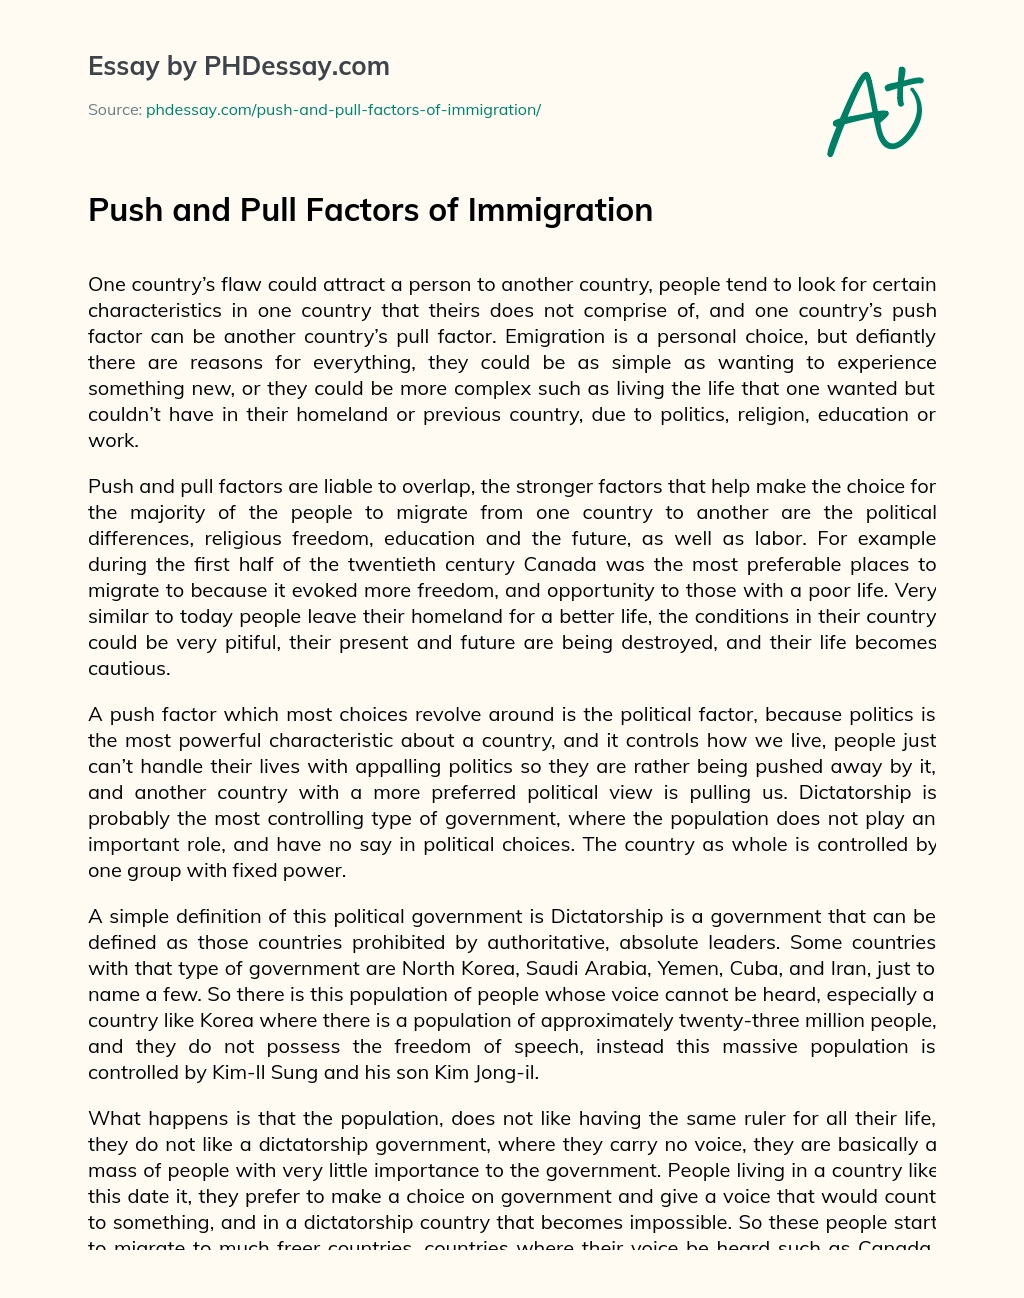 Push and Pull Factors of Immigration essay